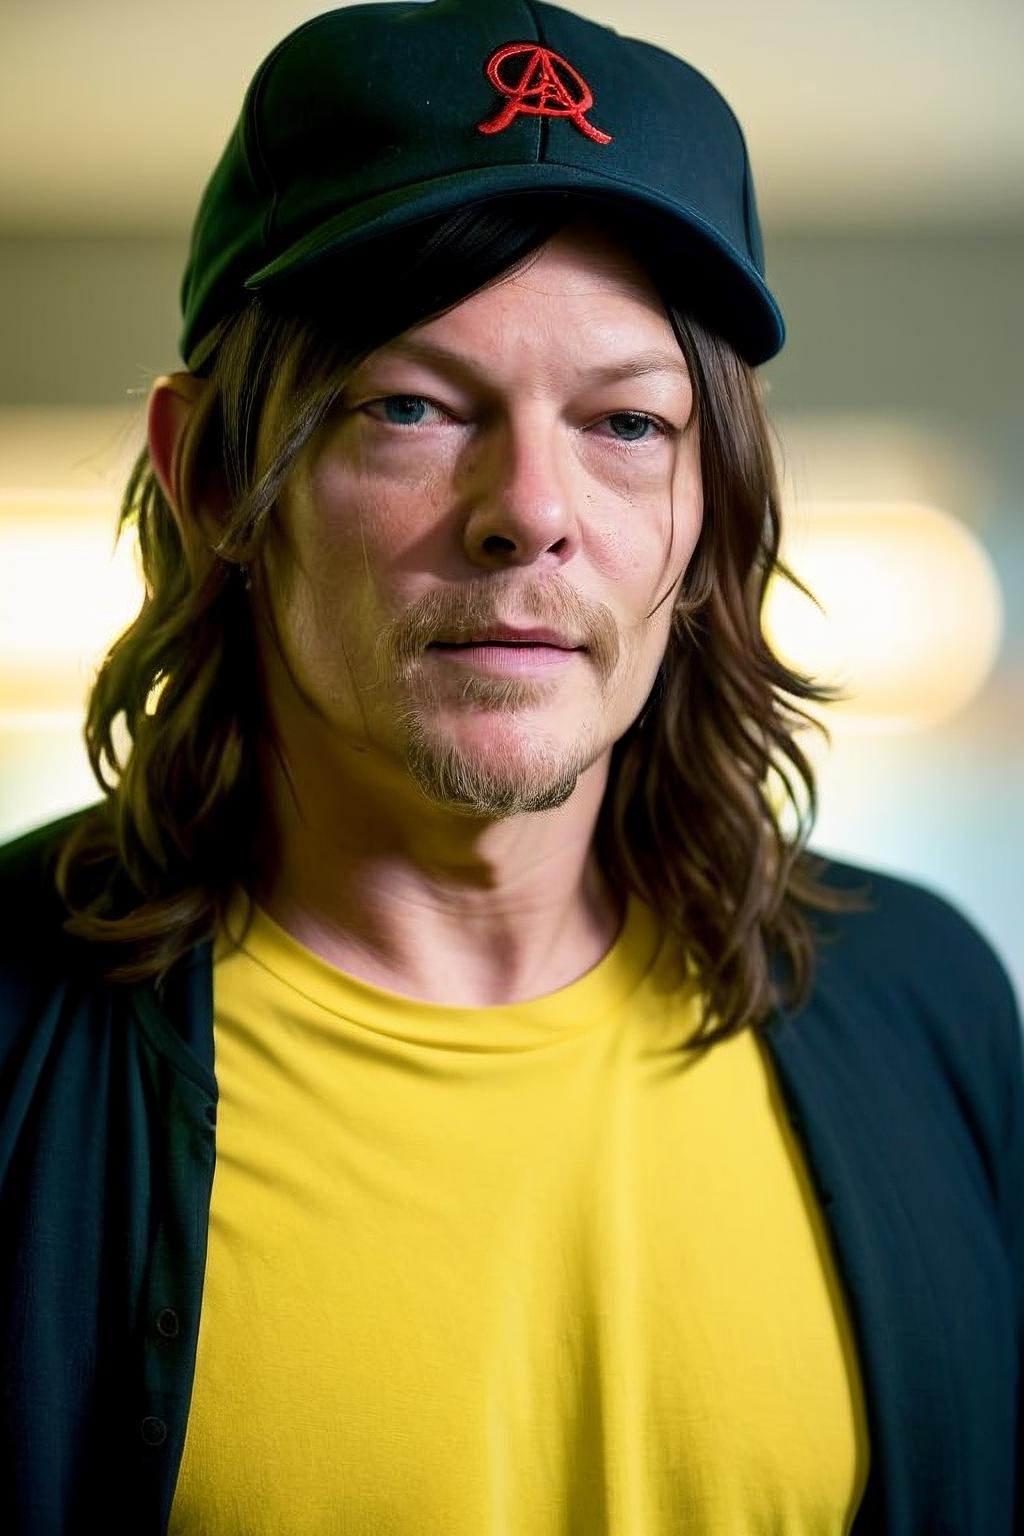 Norman Reedus image by occidental